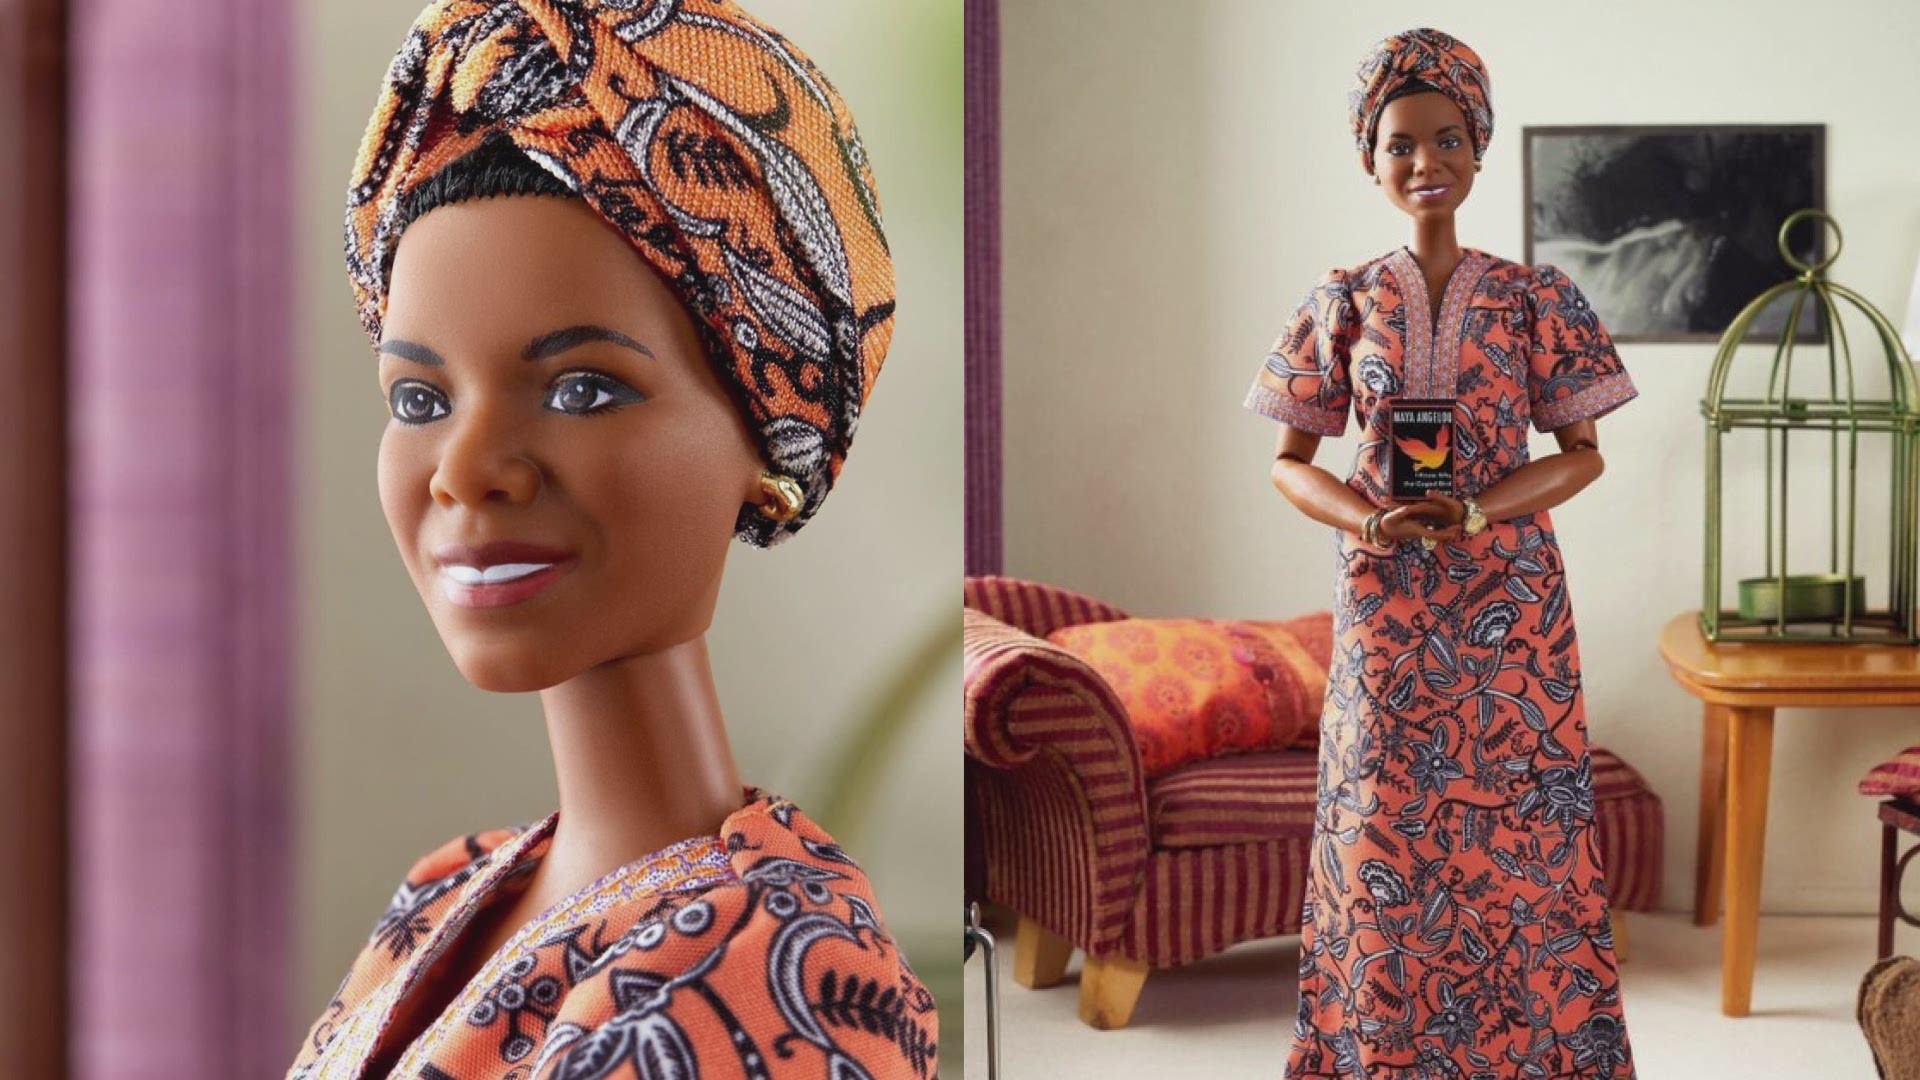 Barbie Introduces New Eleanor Roosevelt Doll